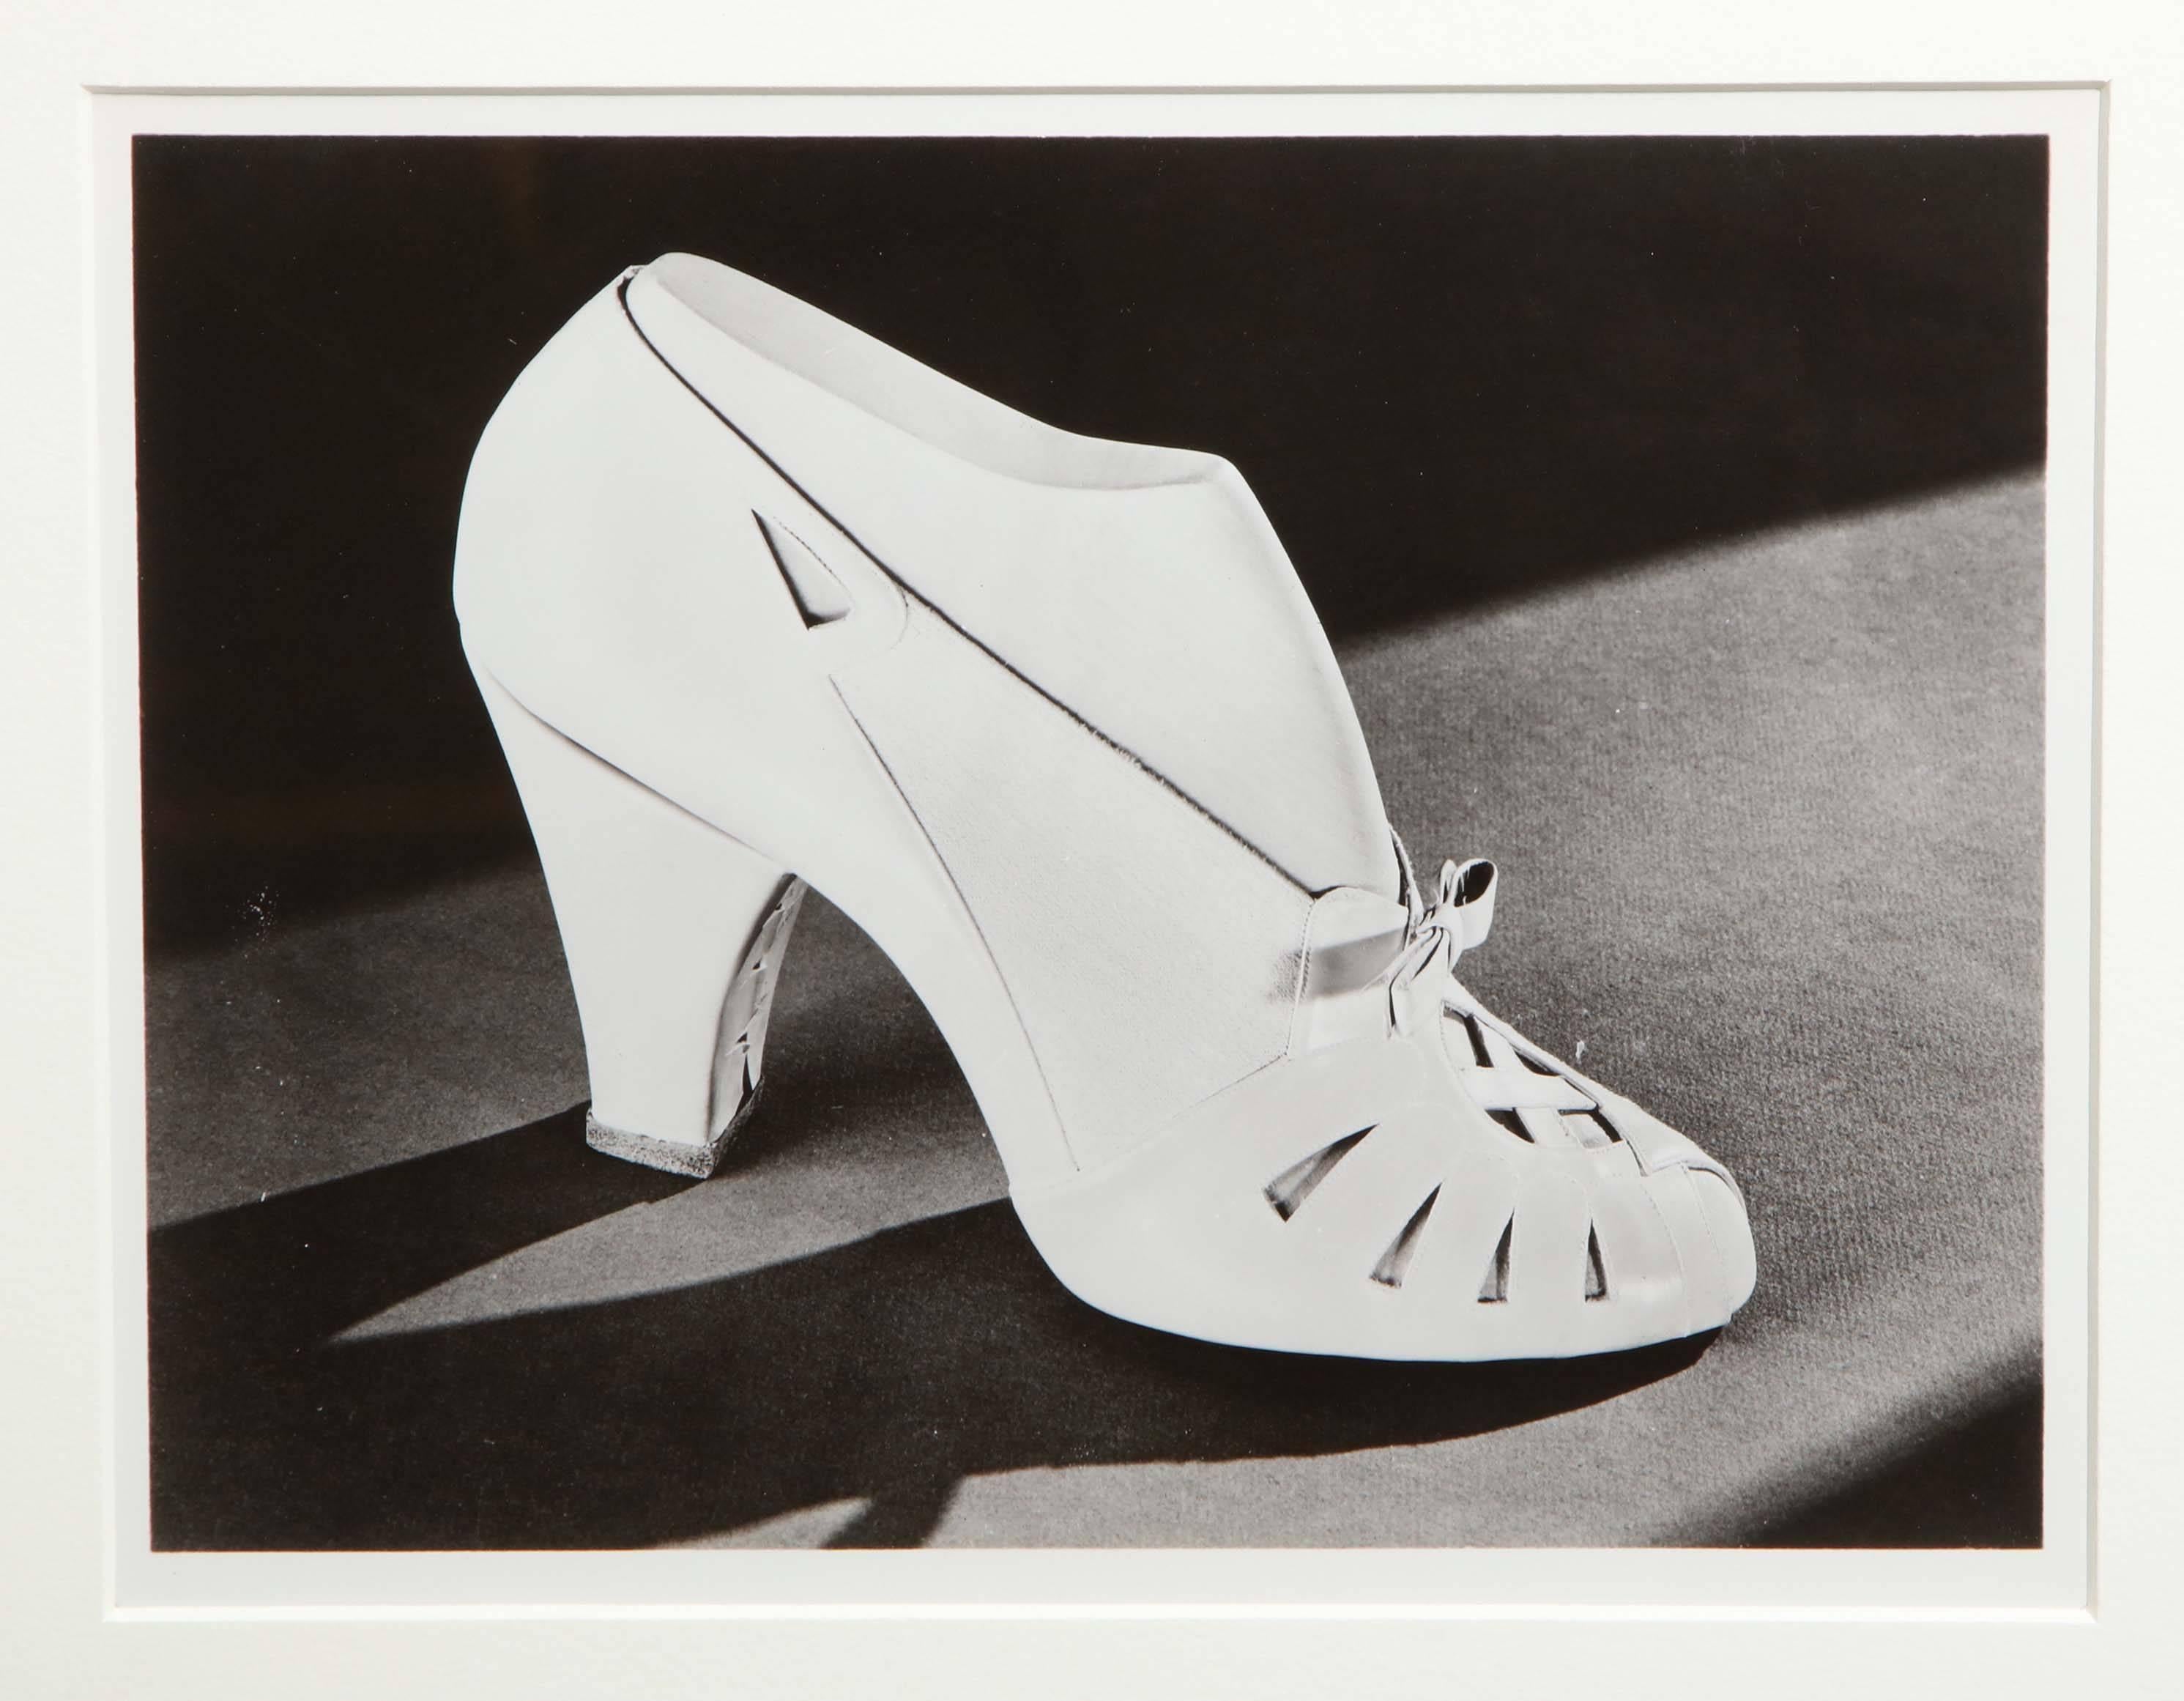 In 1947 John Stuart Cloud (Minneapolis 1914-2007) took a group of photographs as promotional tools for Thomas Taylor and Sons, Inc., a Hudson, Massachusetts manufacturer of elastic shoe goring, shoe and corset laces, braids and trimmings. The